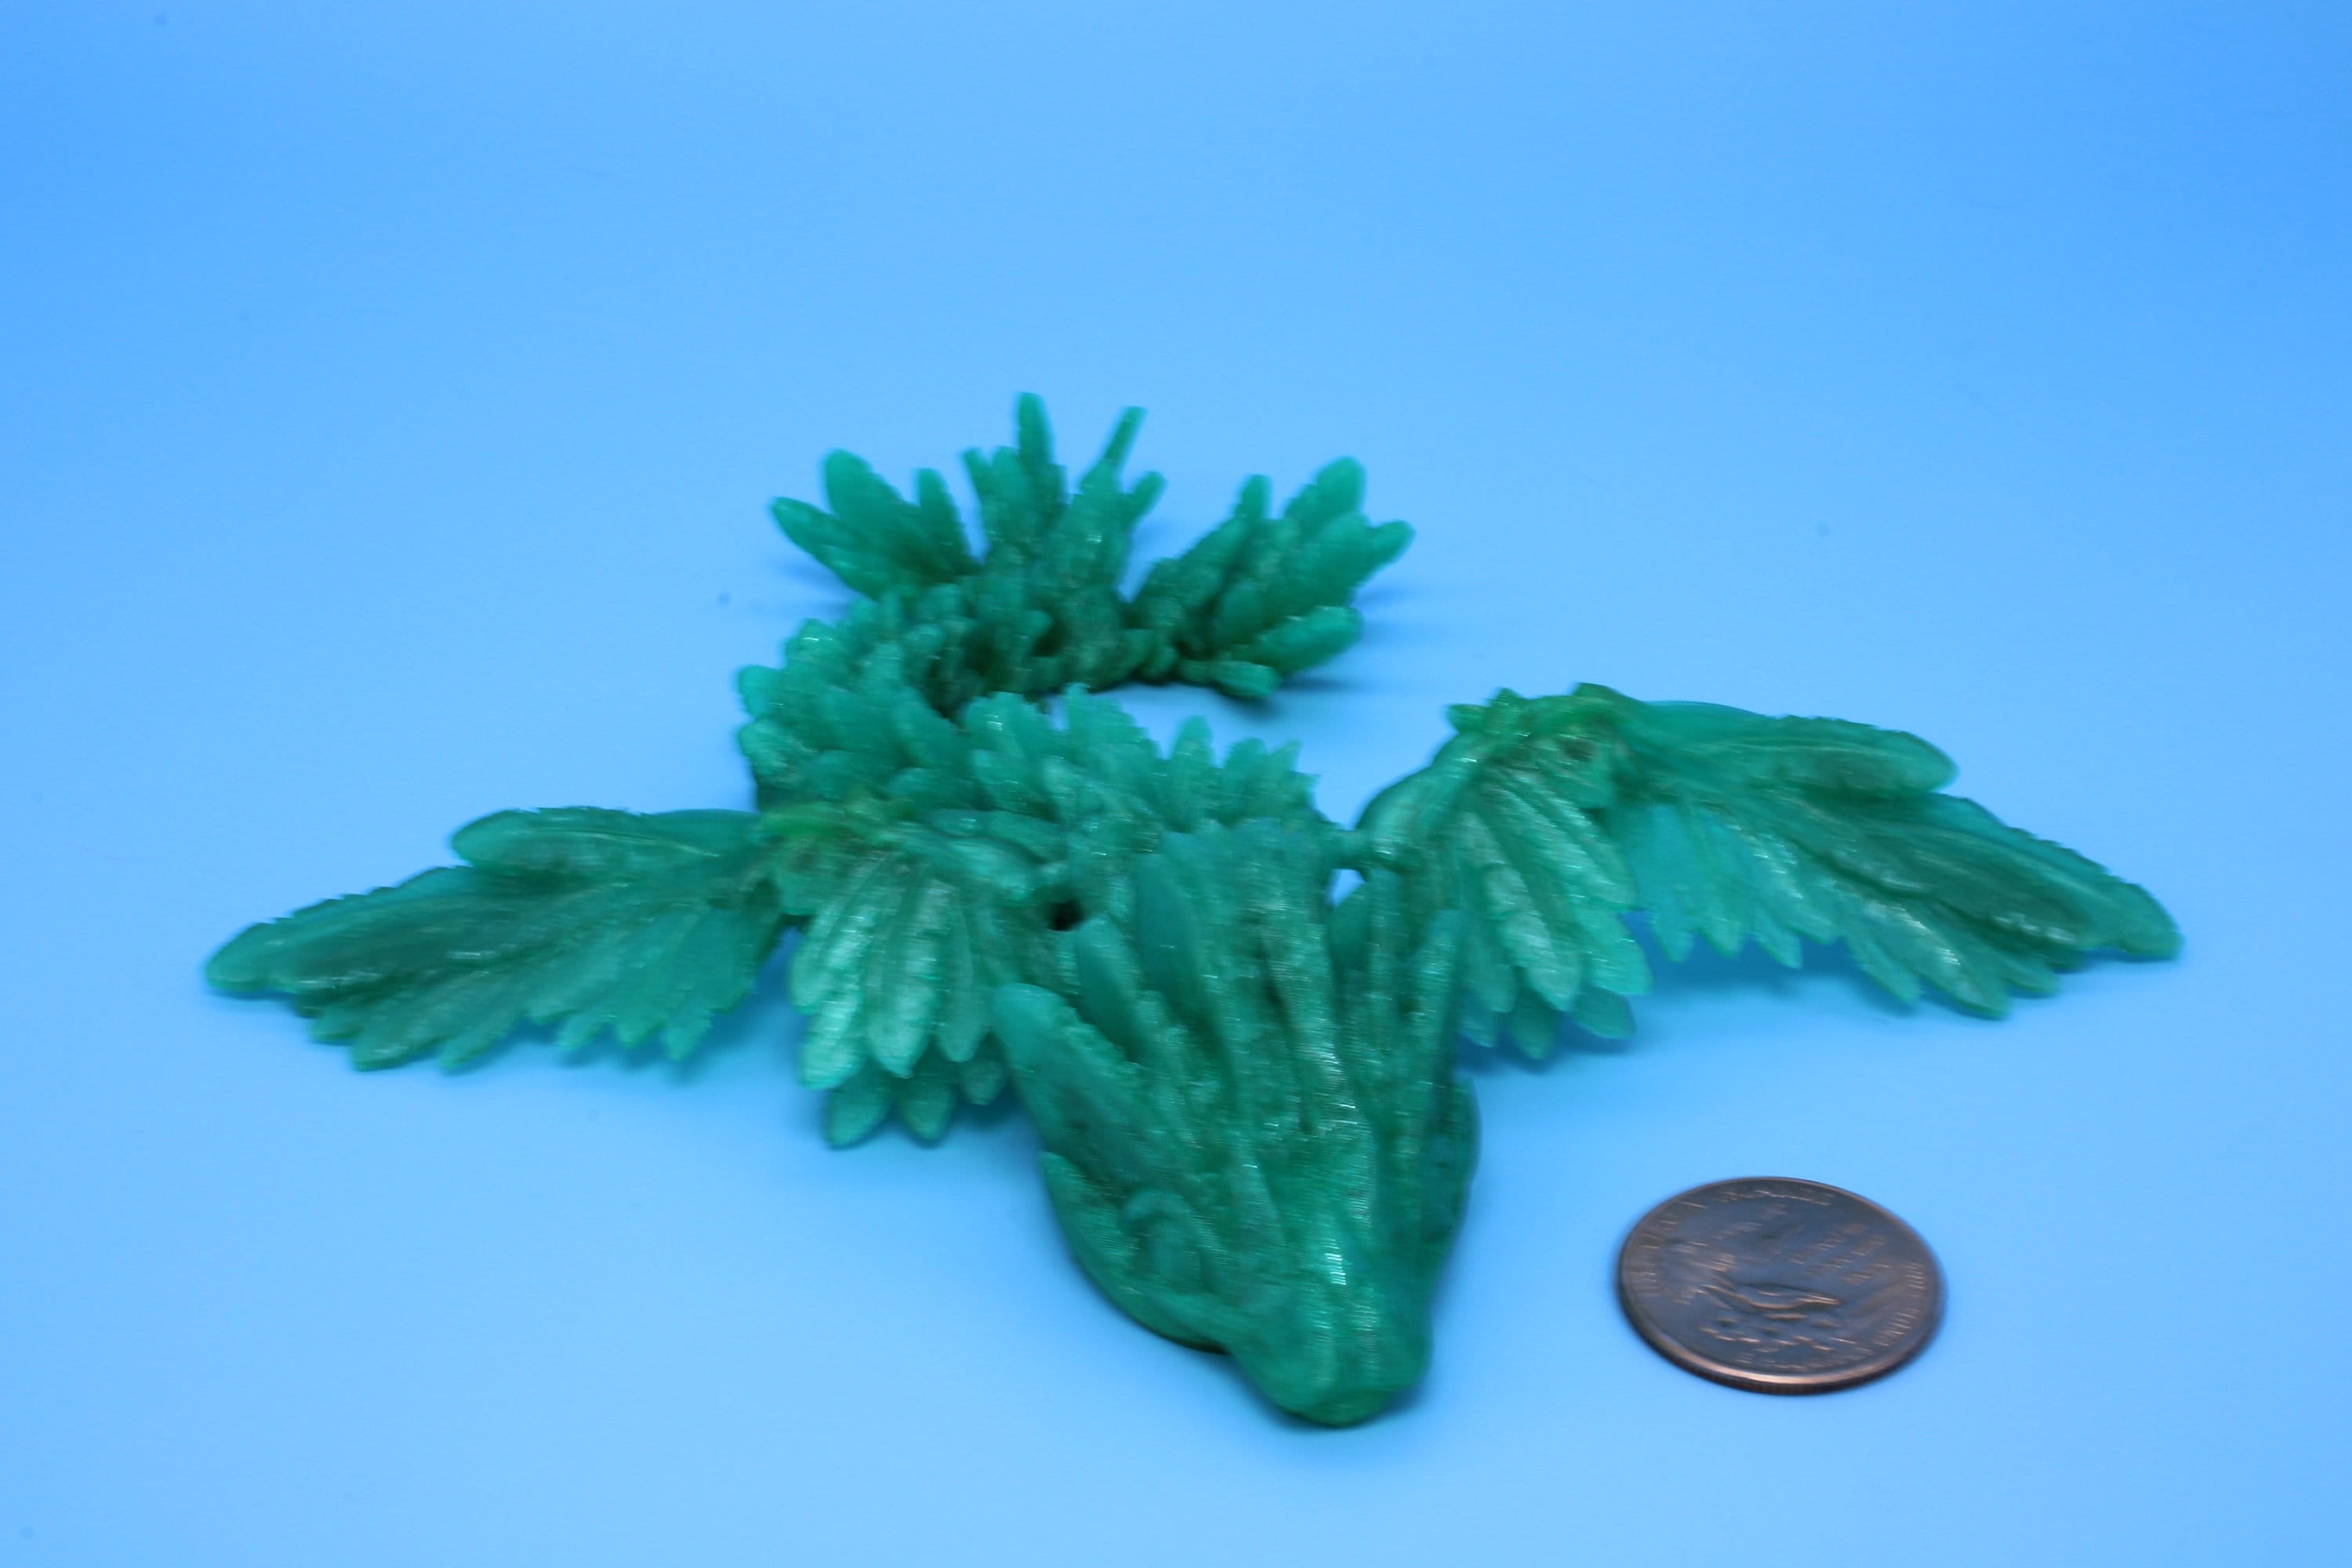 Baby Flying Serpent-Green | 3D printed TPU | Flexible Miniature | 7 in.